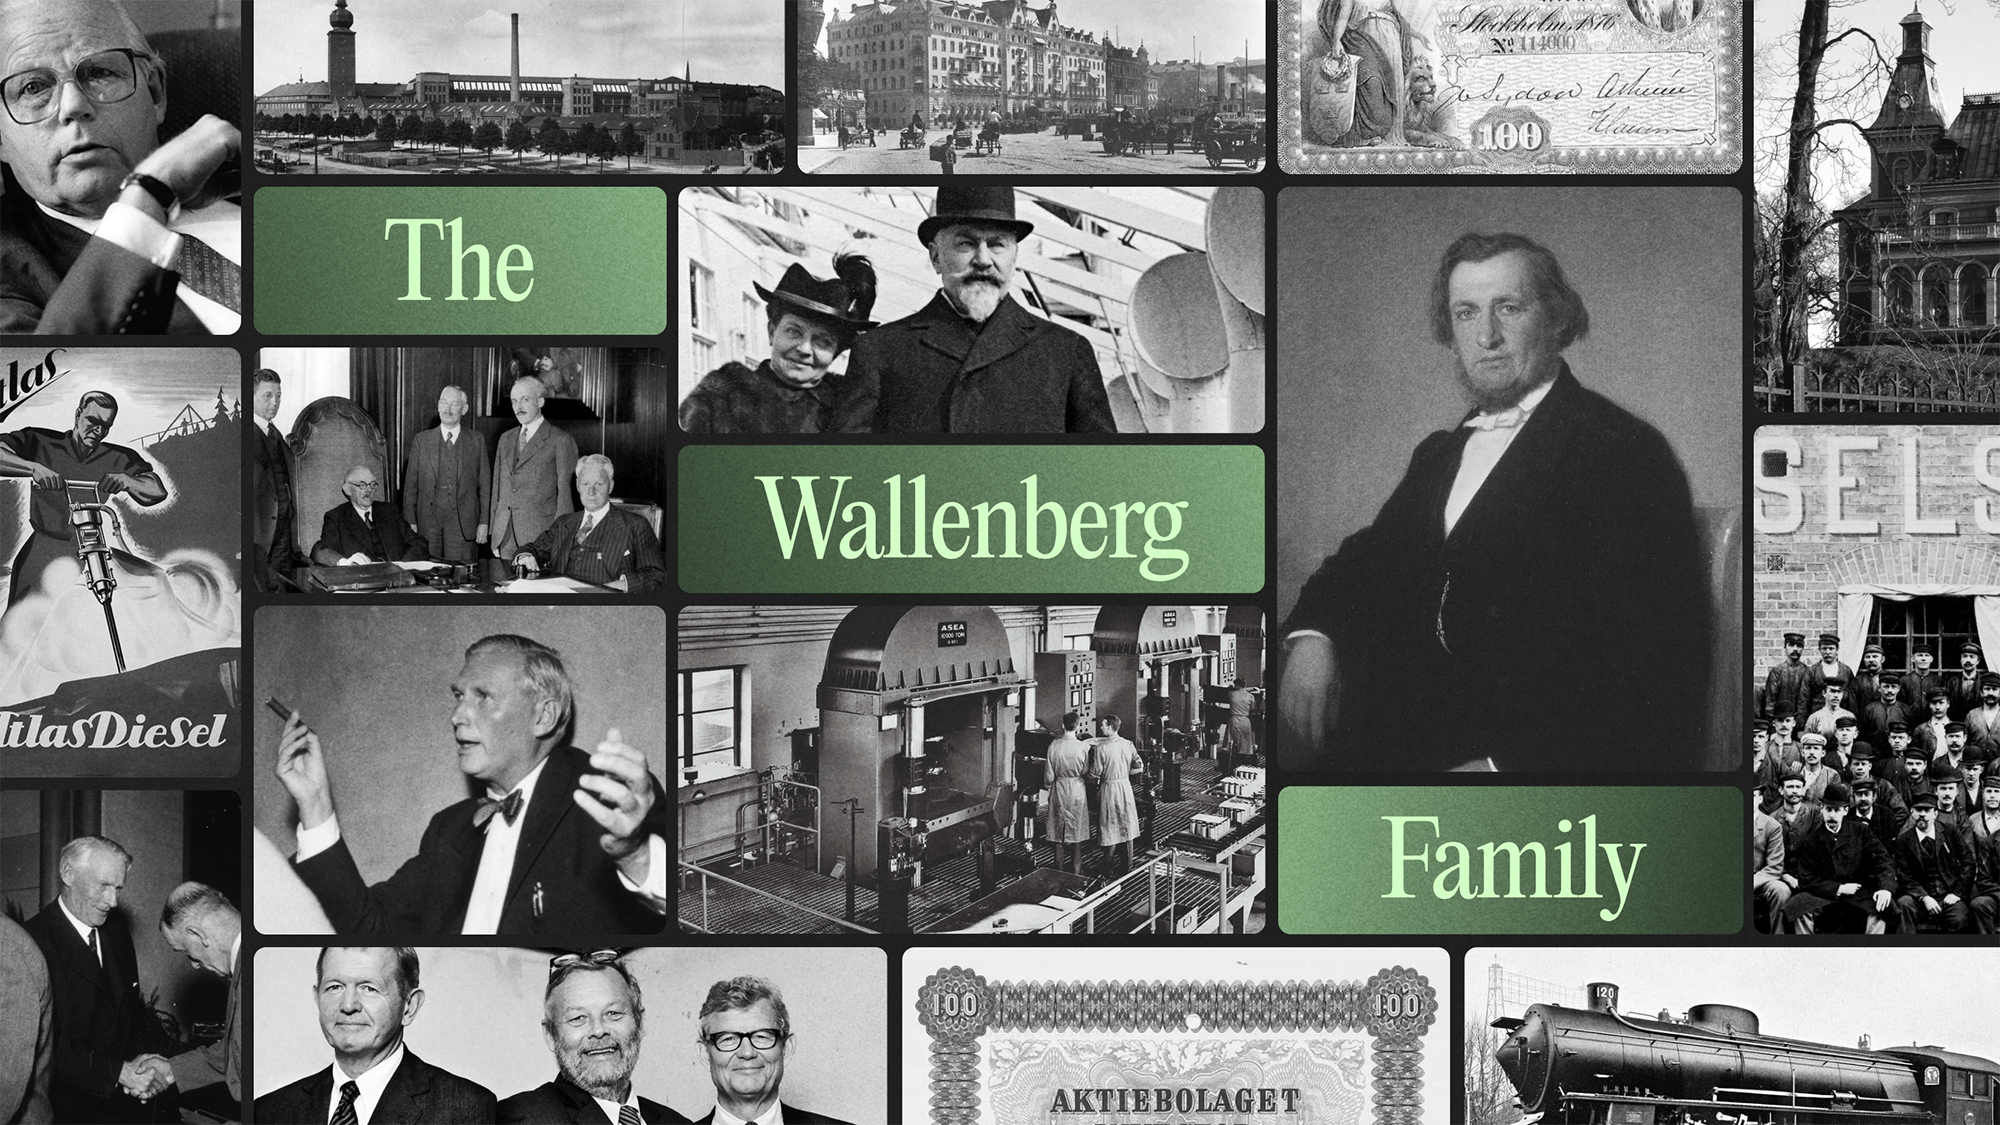 The story behind the Wallenberg family